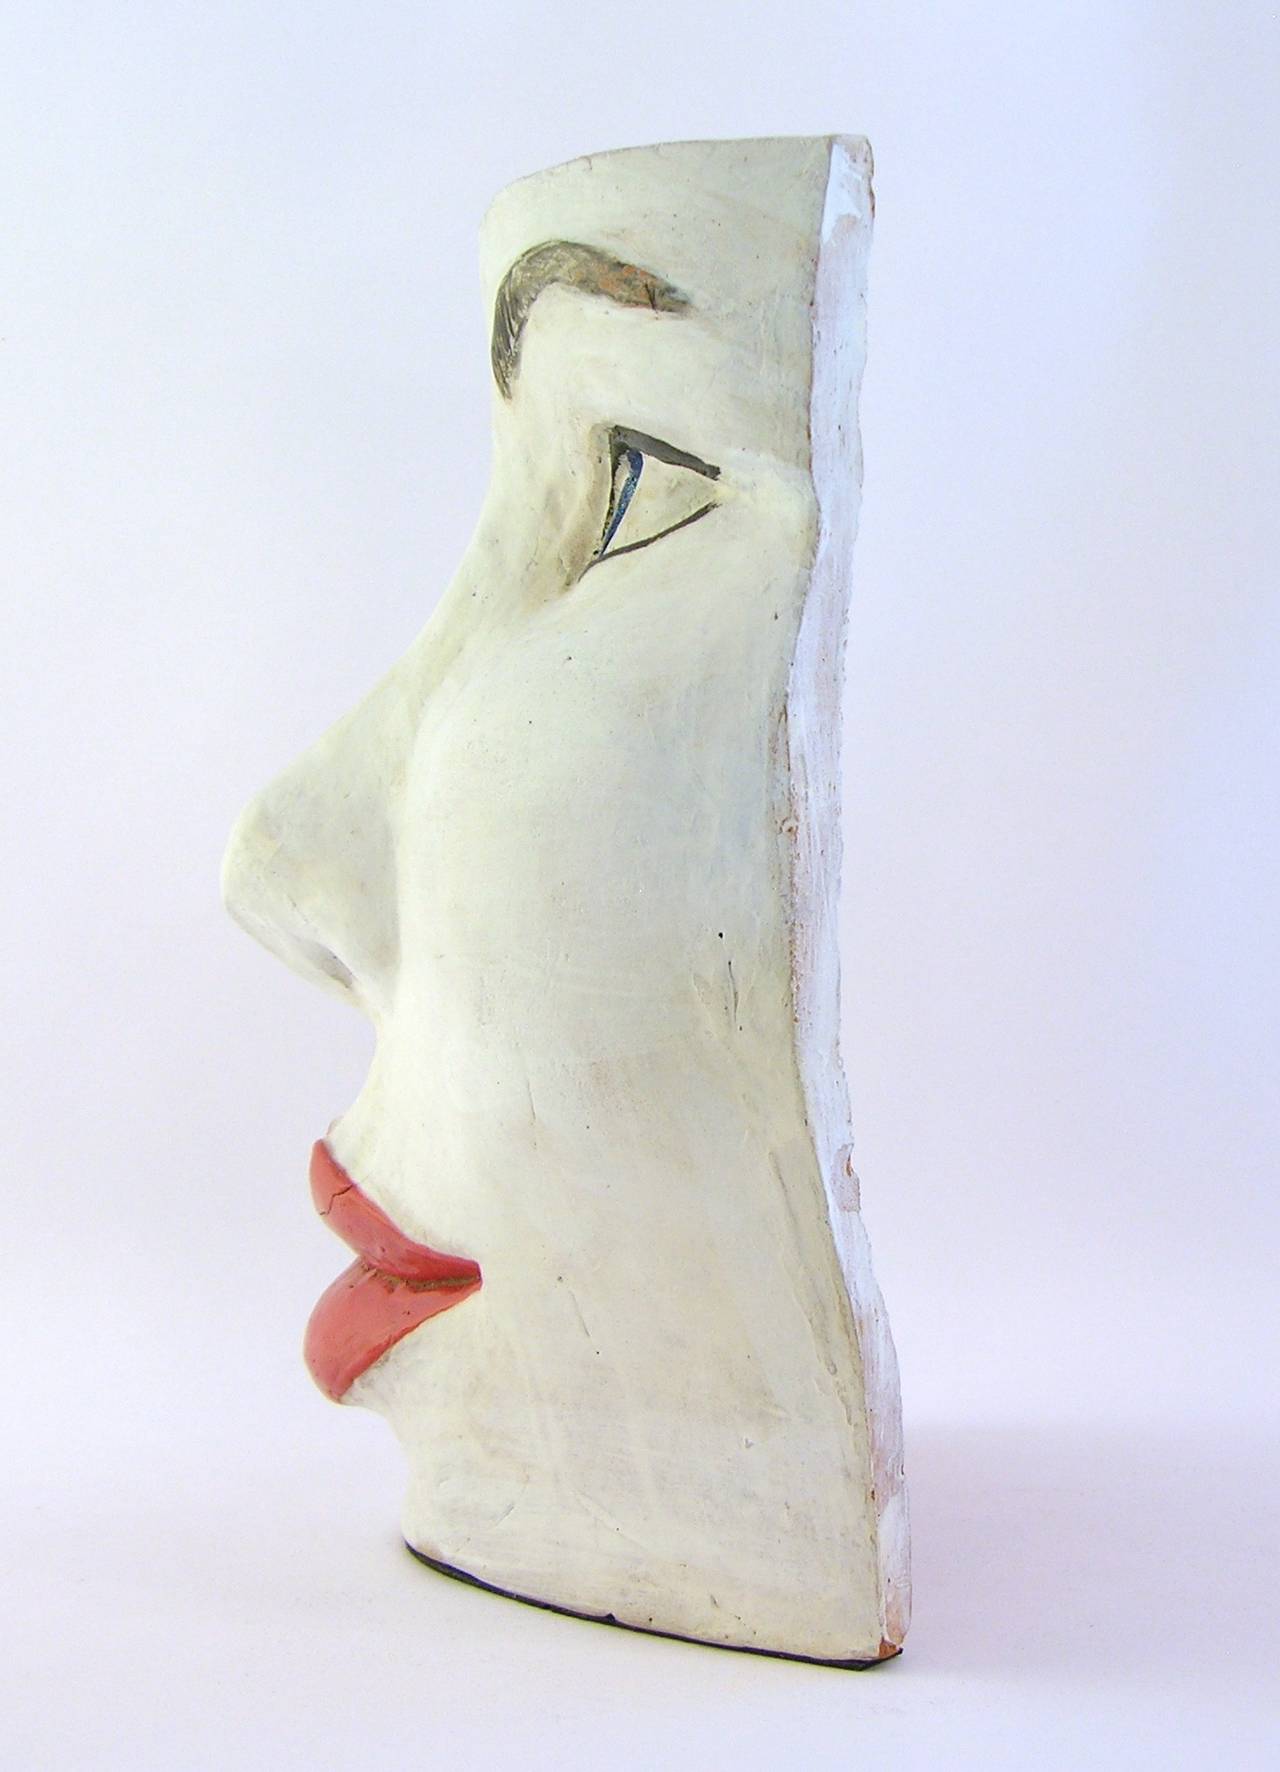 Hand-Crafted Blue Eyes Face Terra Cotta Sculpture by Ginestroni For Sale